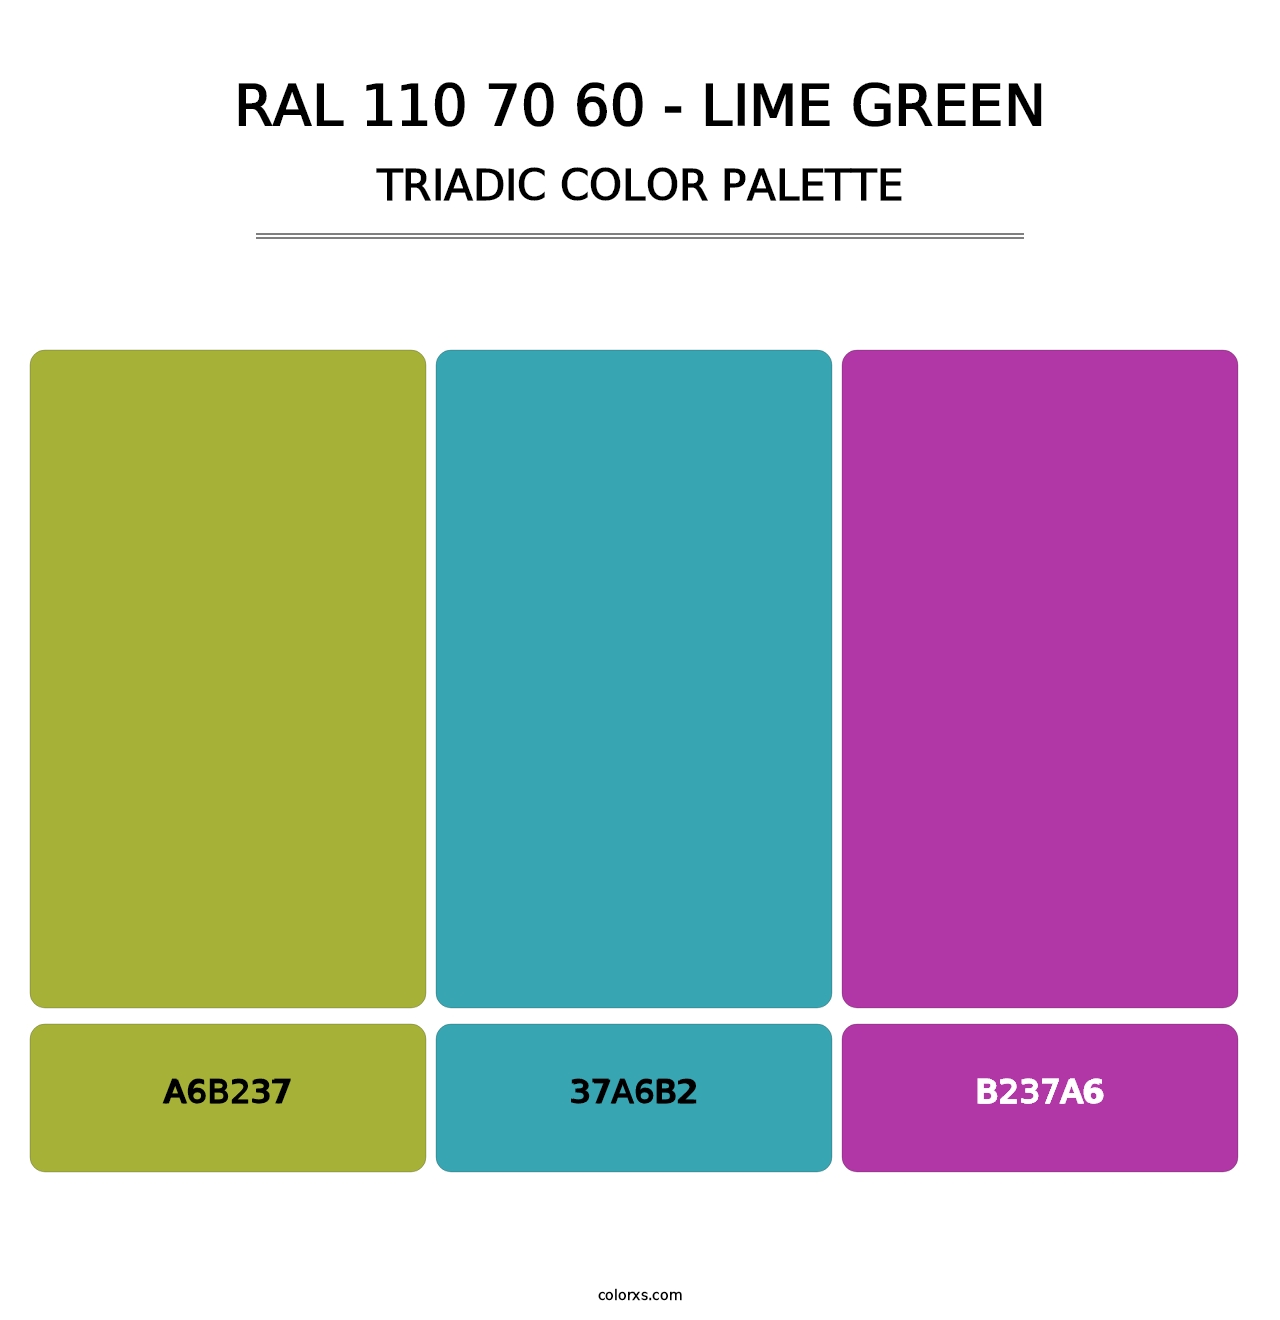 RAL 110 70 60 - Lime Green - Triadic Color Palette